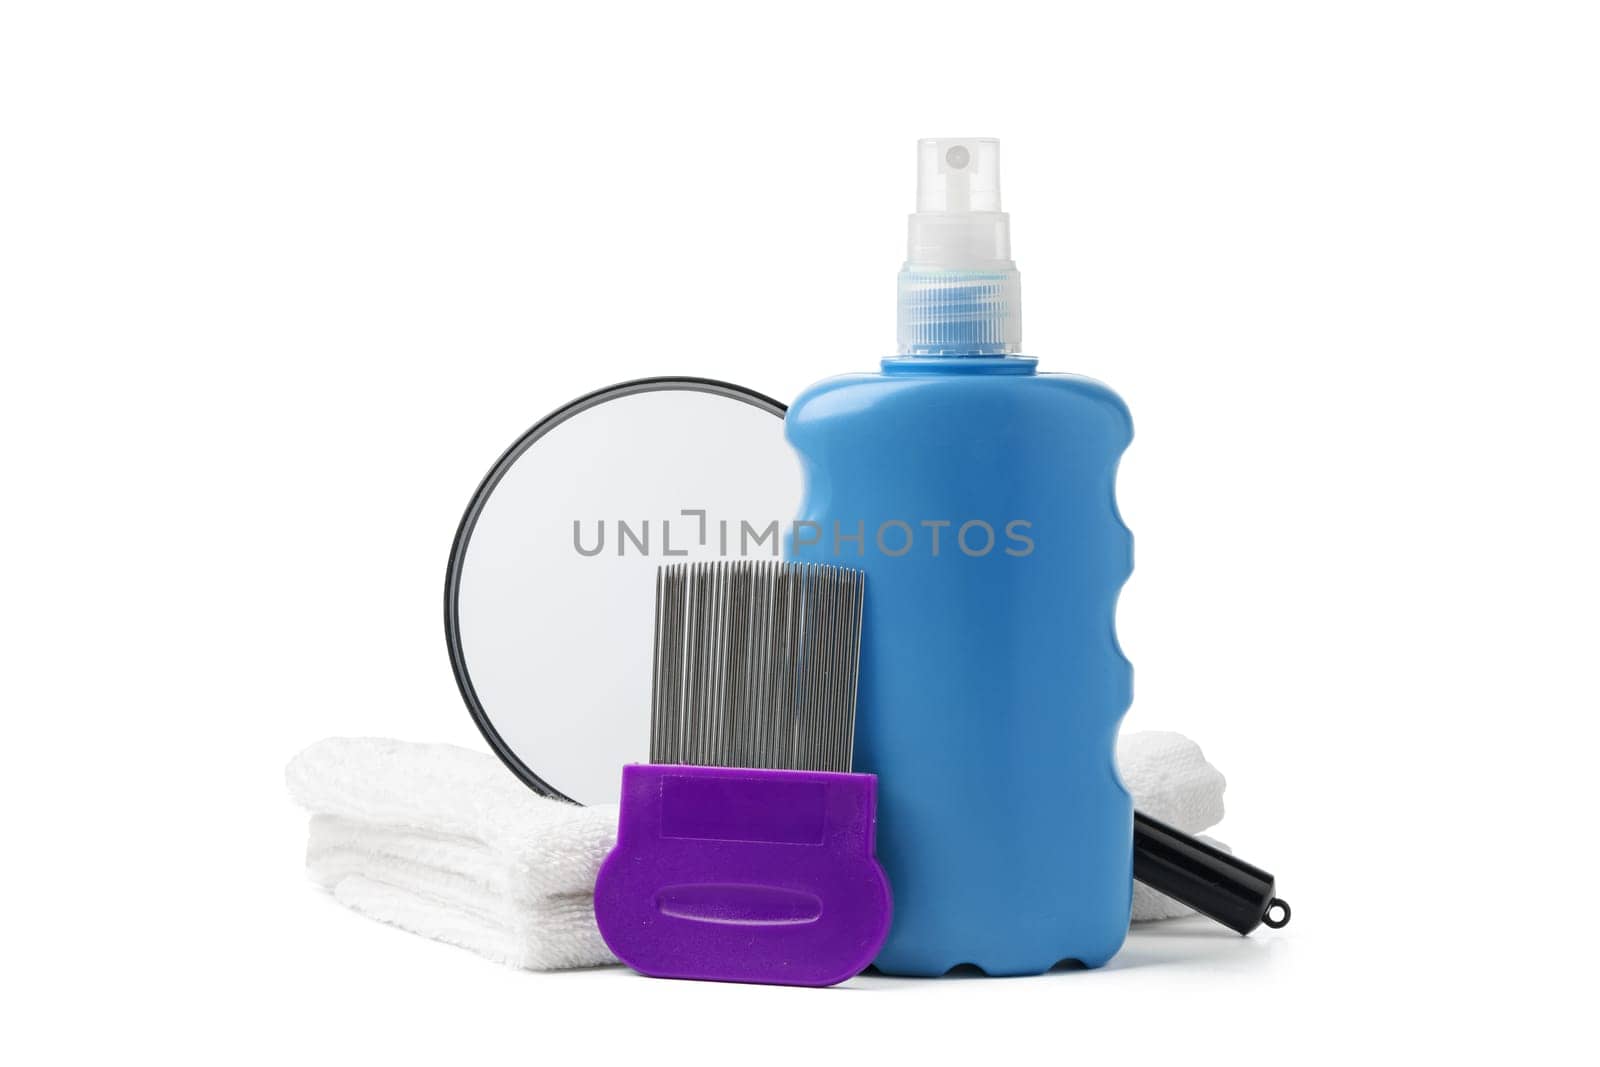 Cosmetic products, lice comb and magnifying glass isolated on white background